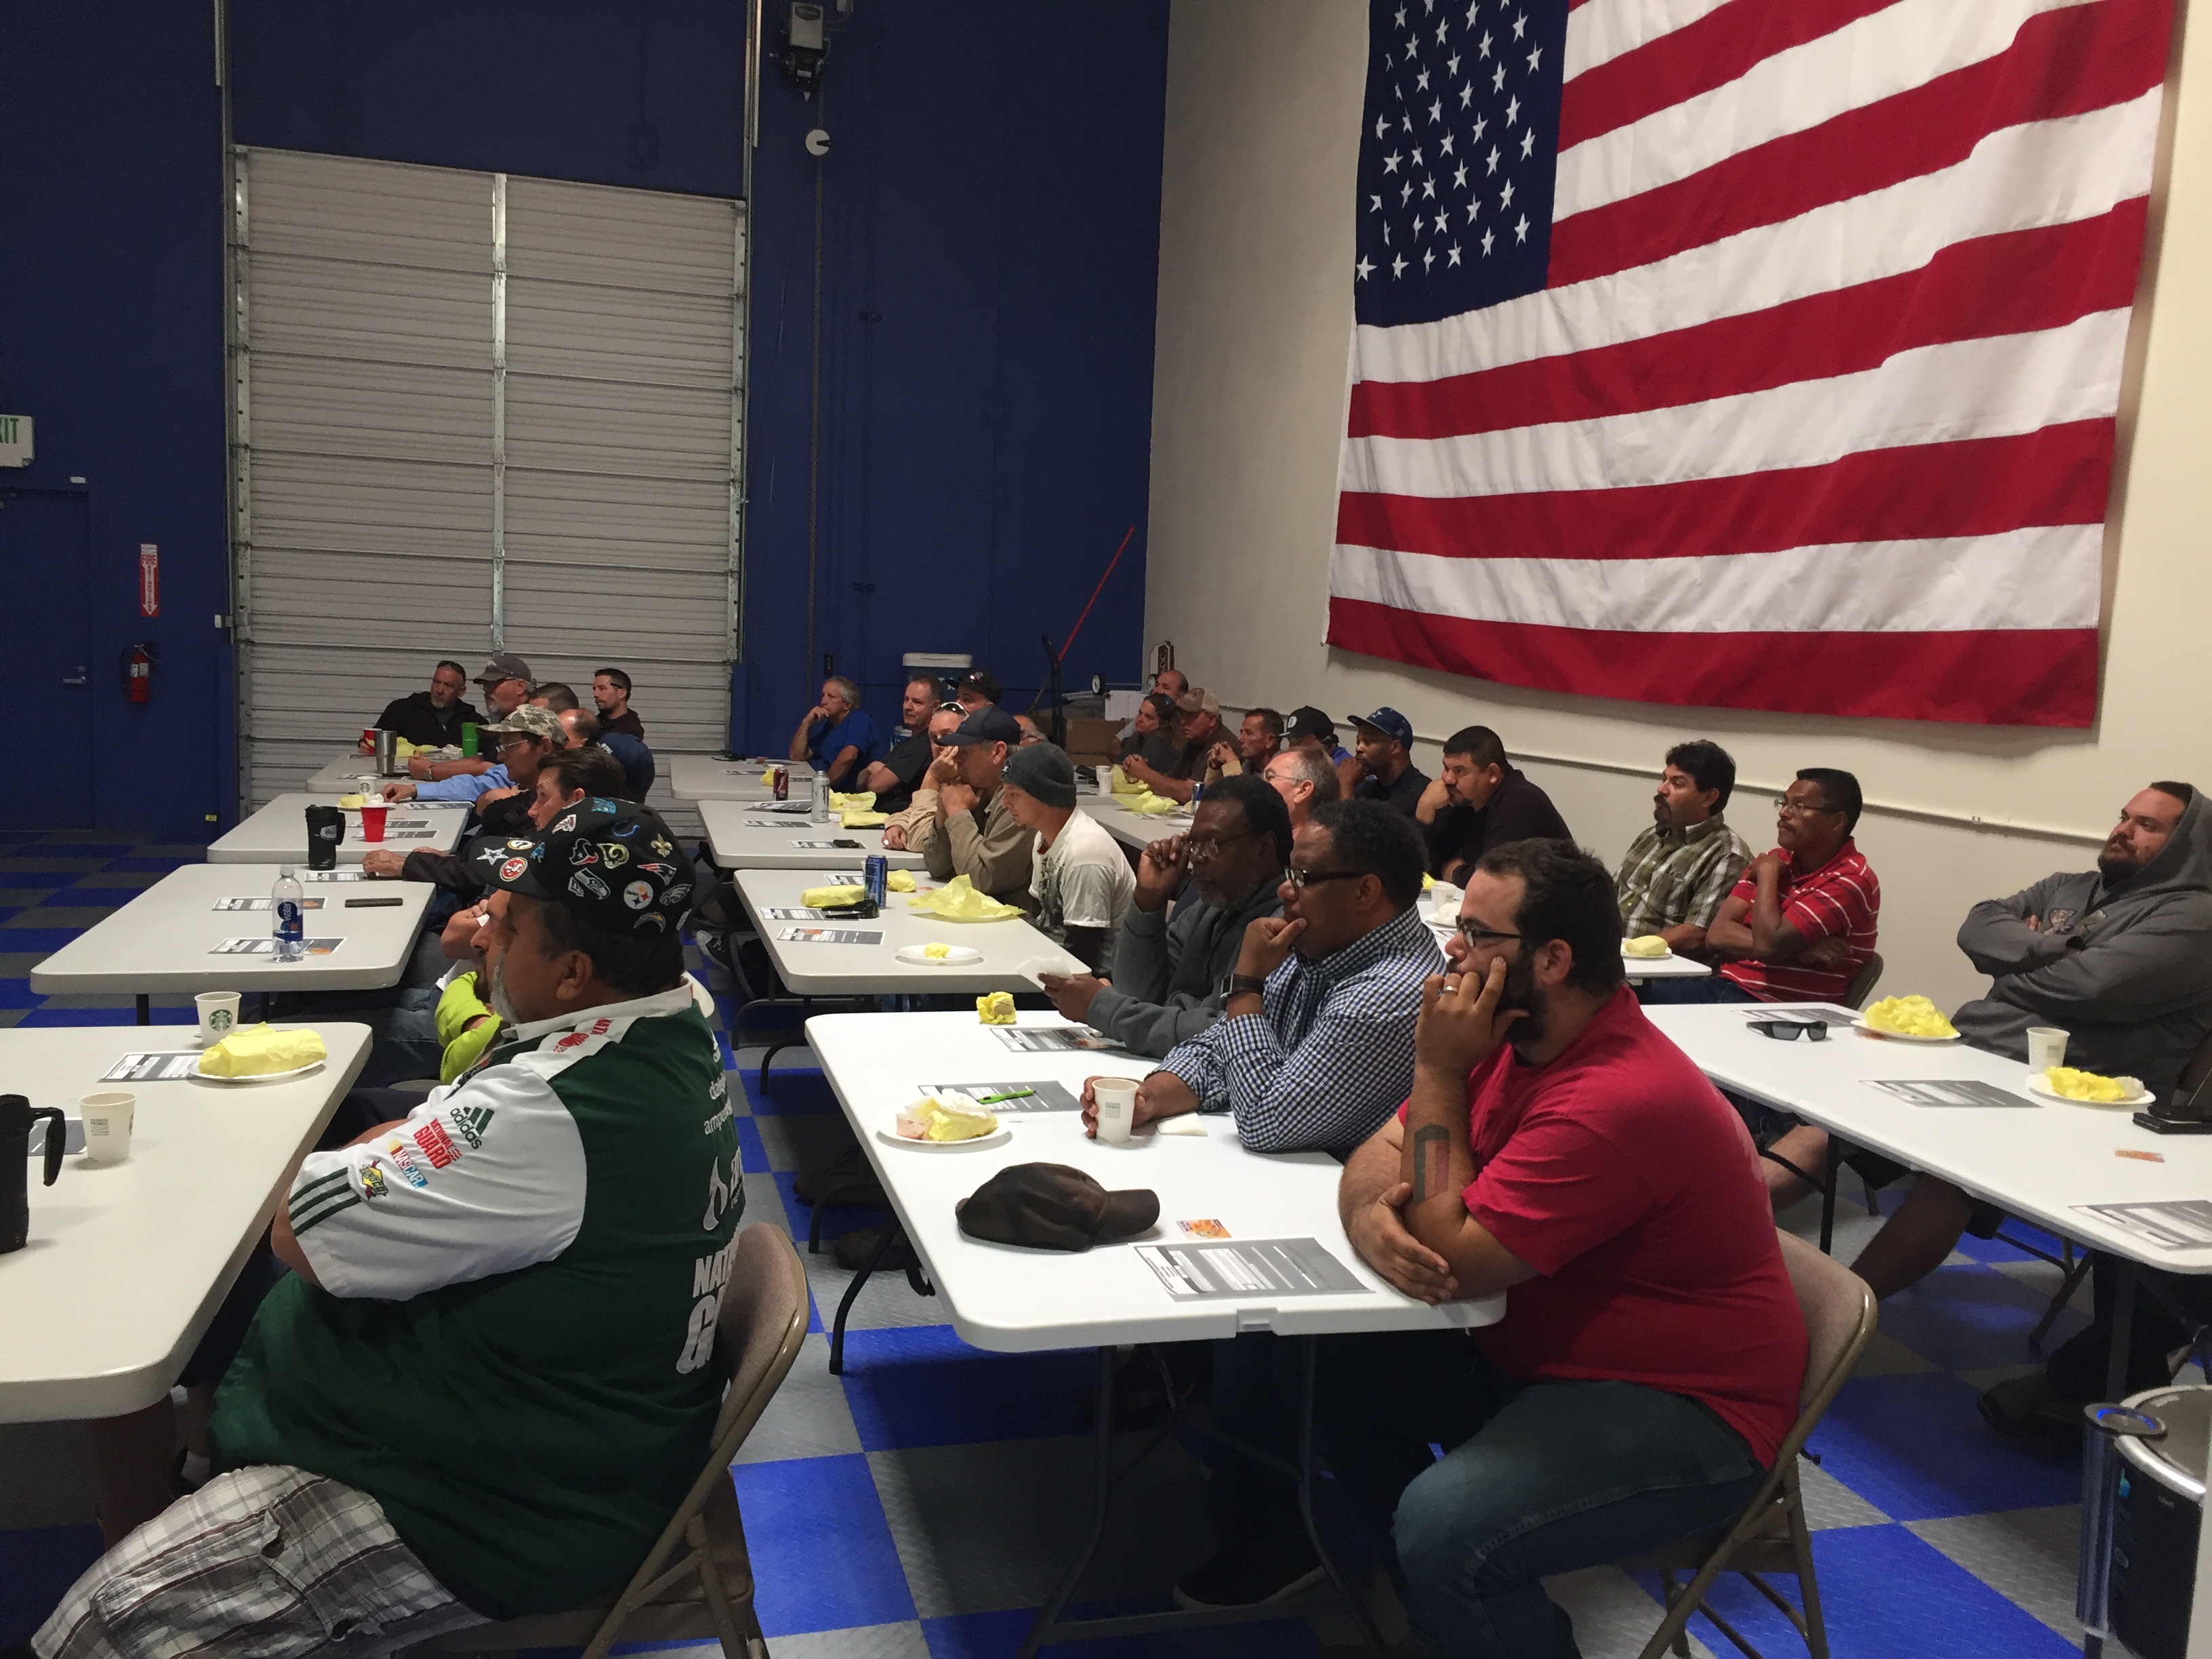 FROM NORTHER NEVADA: RENO SAFETY MEETING